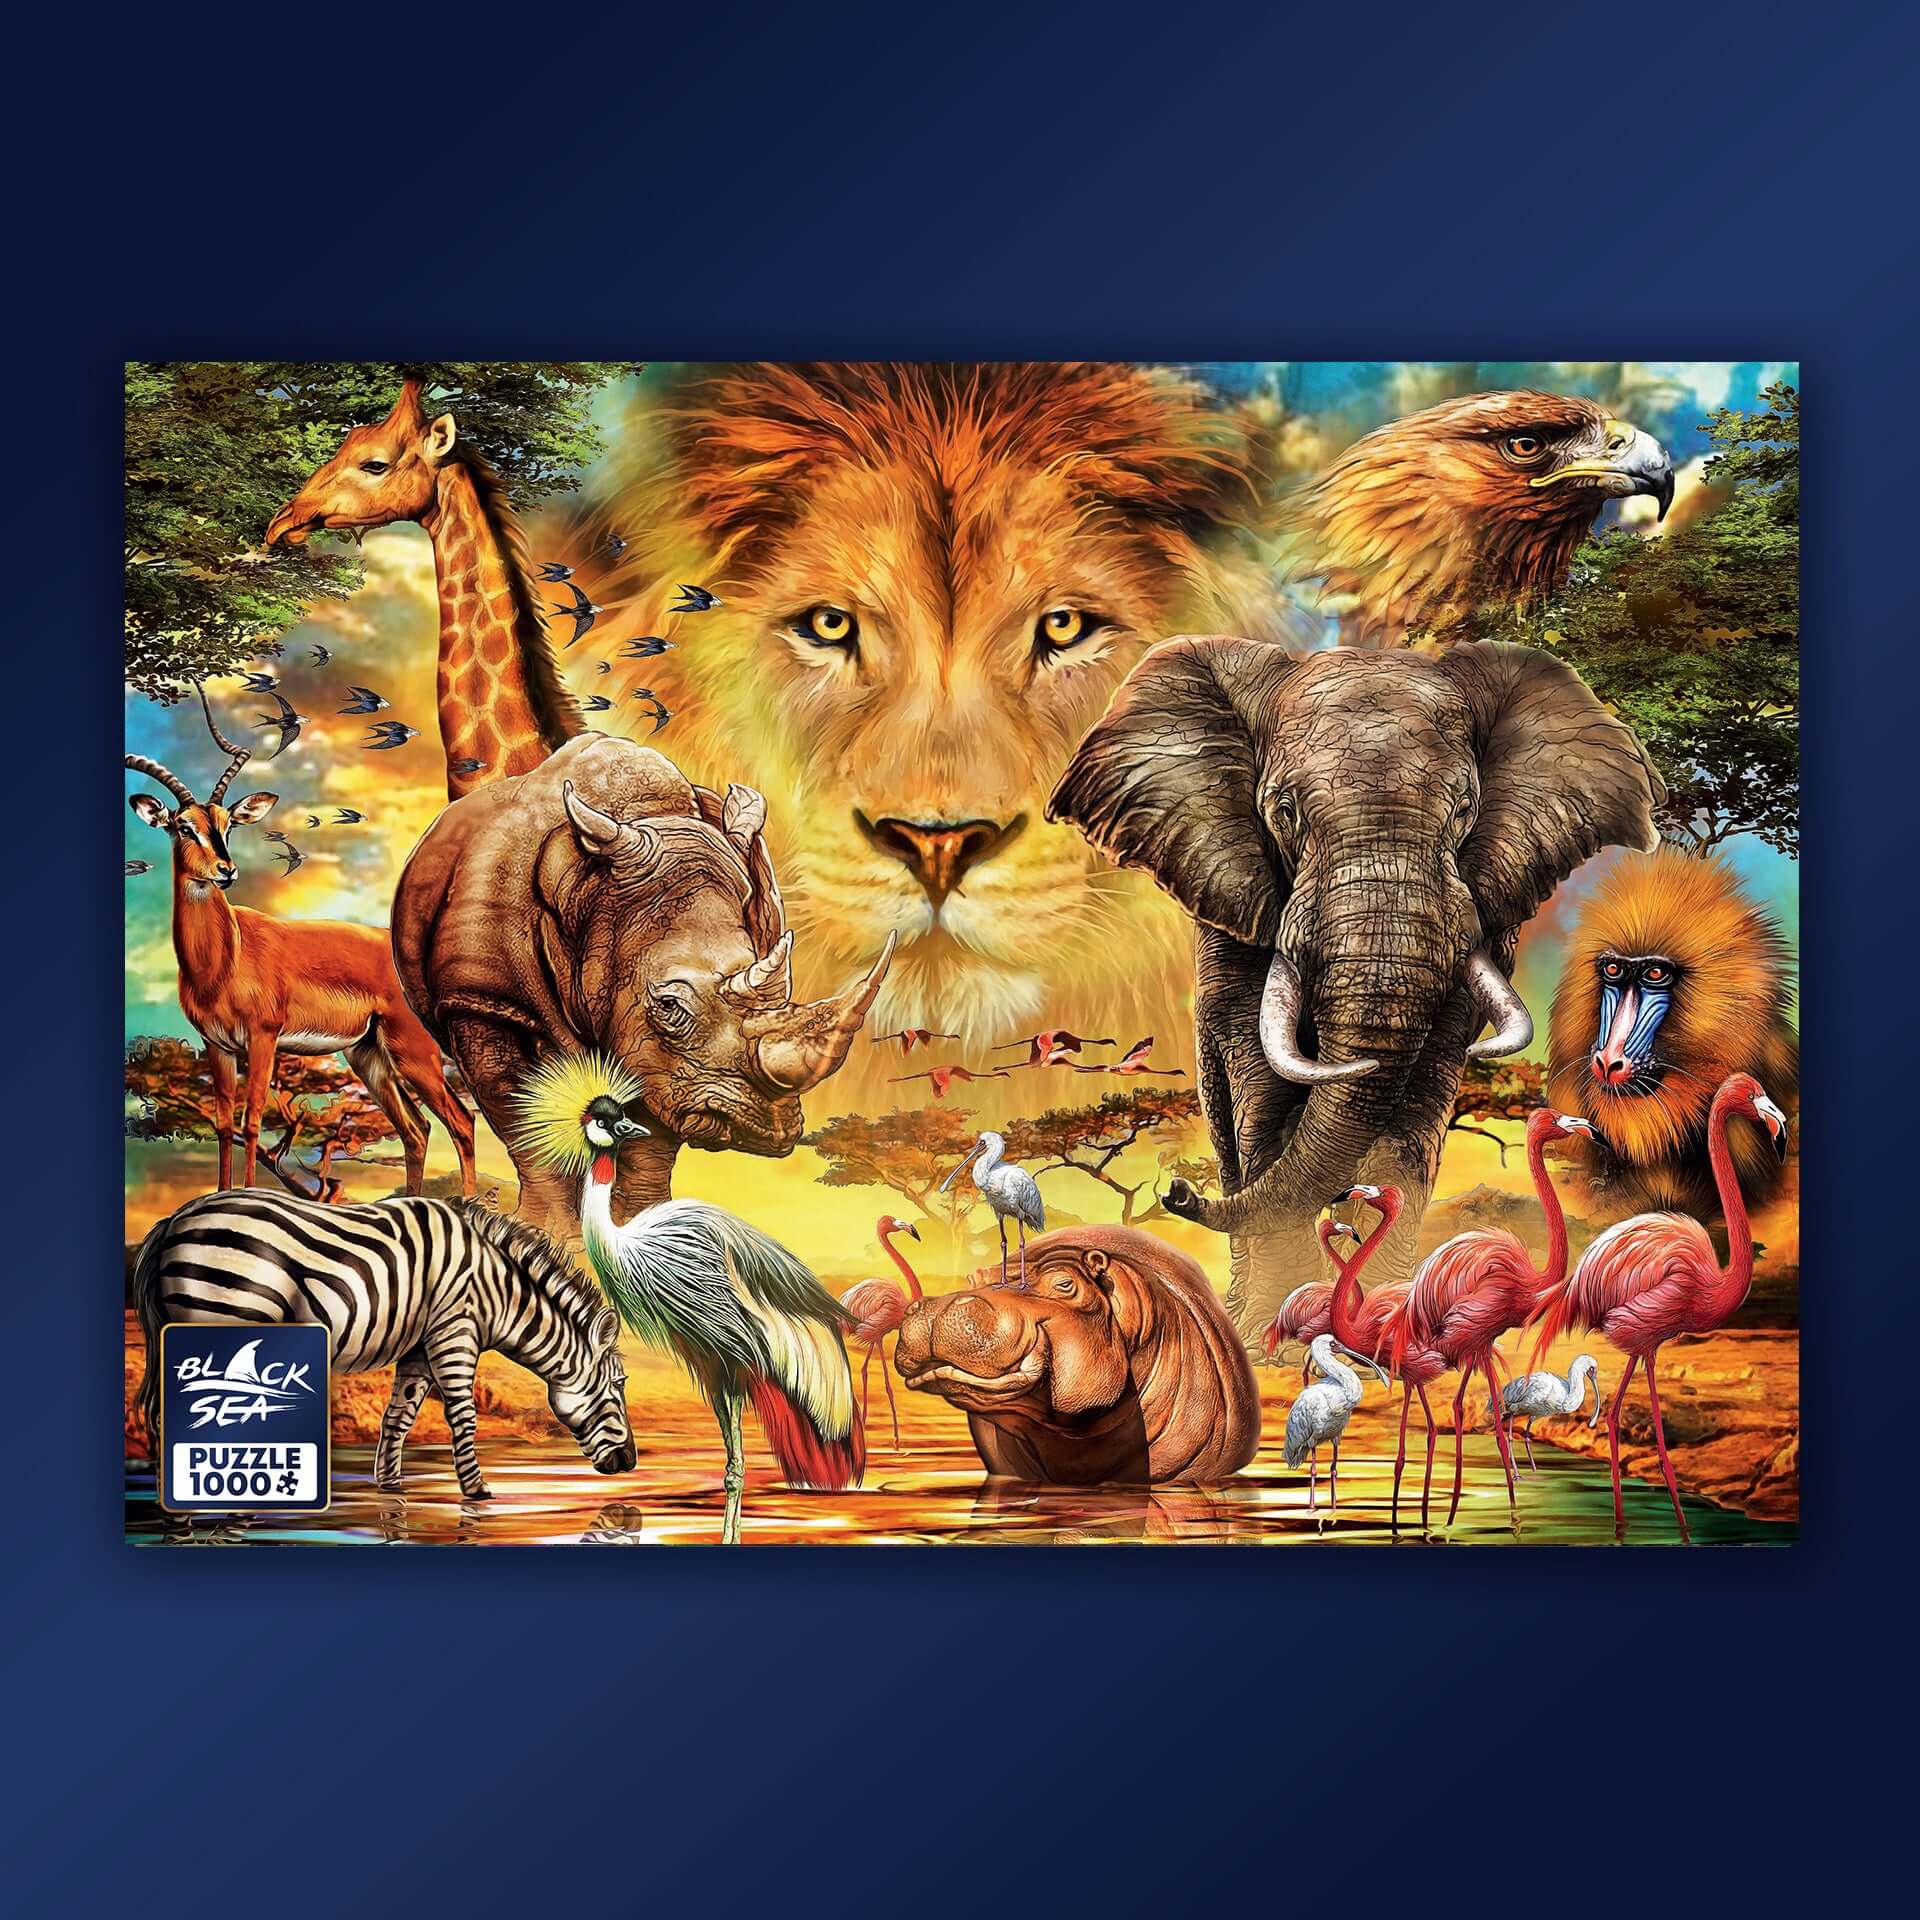 Puzzle Black Sea 1000 pieces - In the heart of africa, Under the scorching sunrays in the African savanna that drain the life from the grass and make the air burn your lungs, animals seek refuge around the few remaining water basins. There they coexist pe